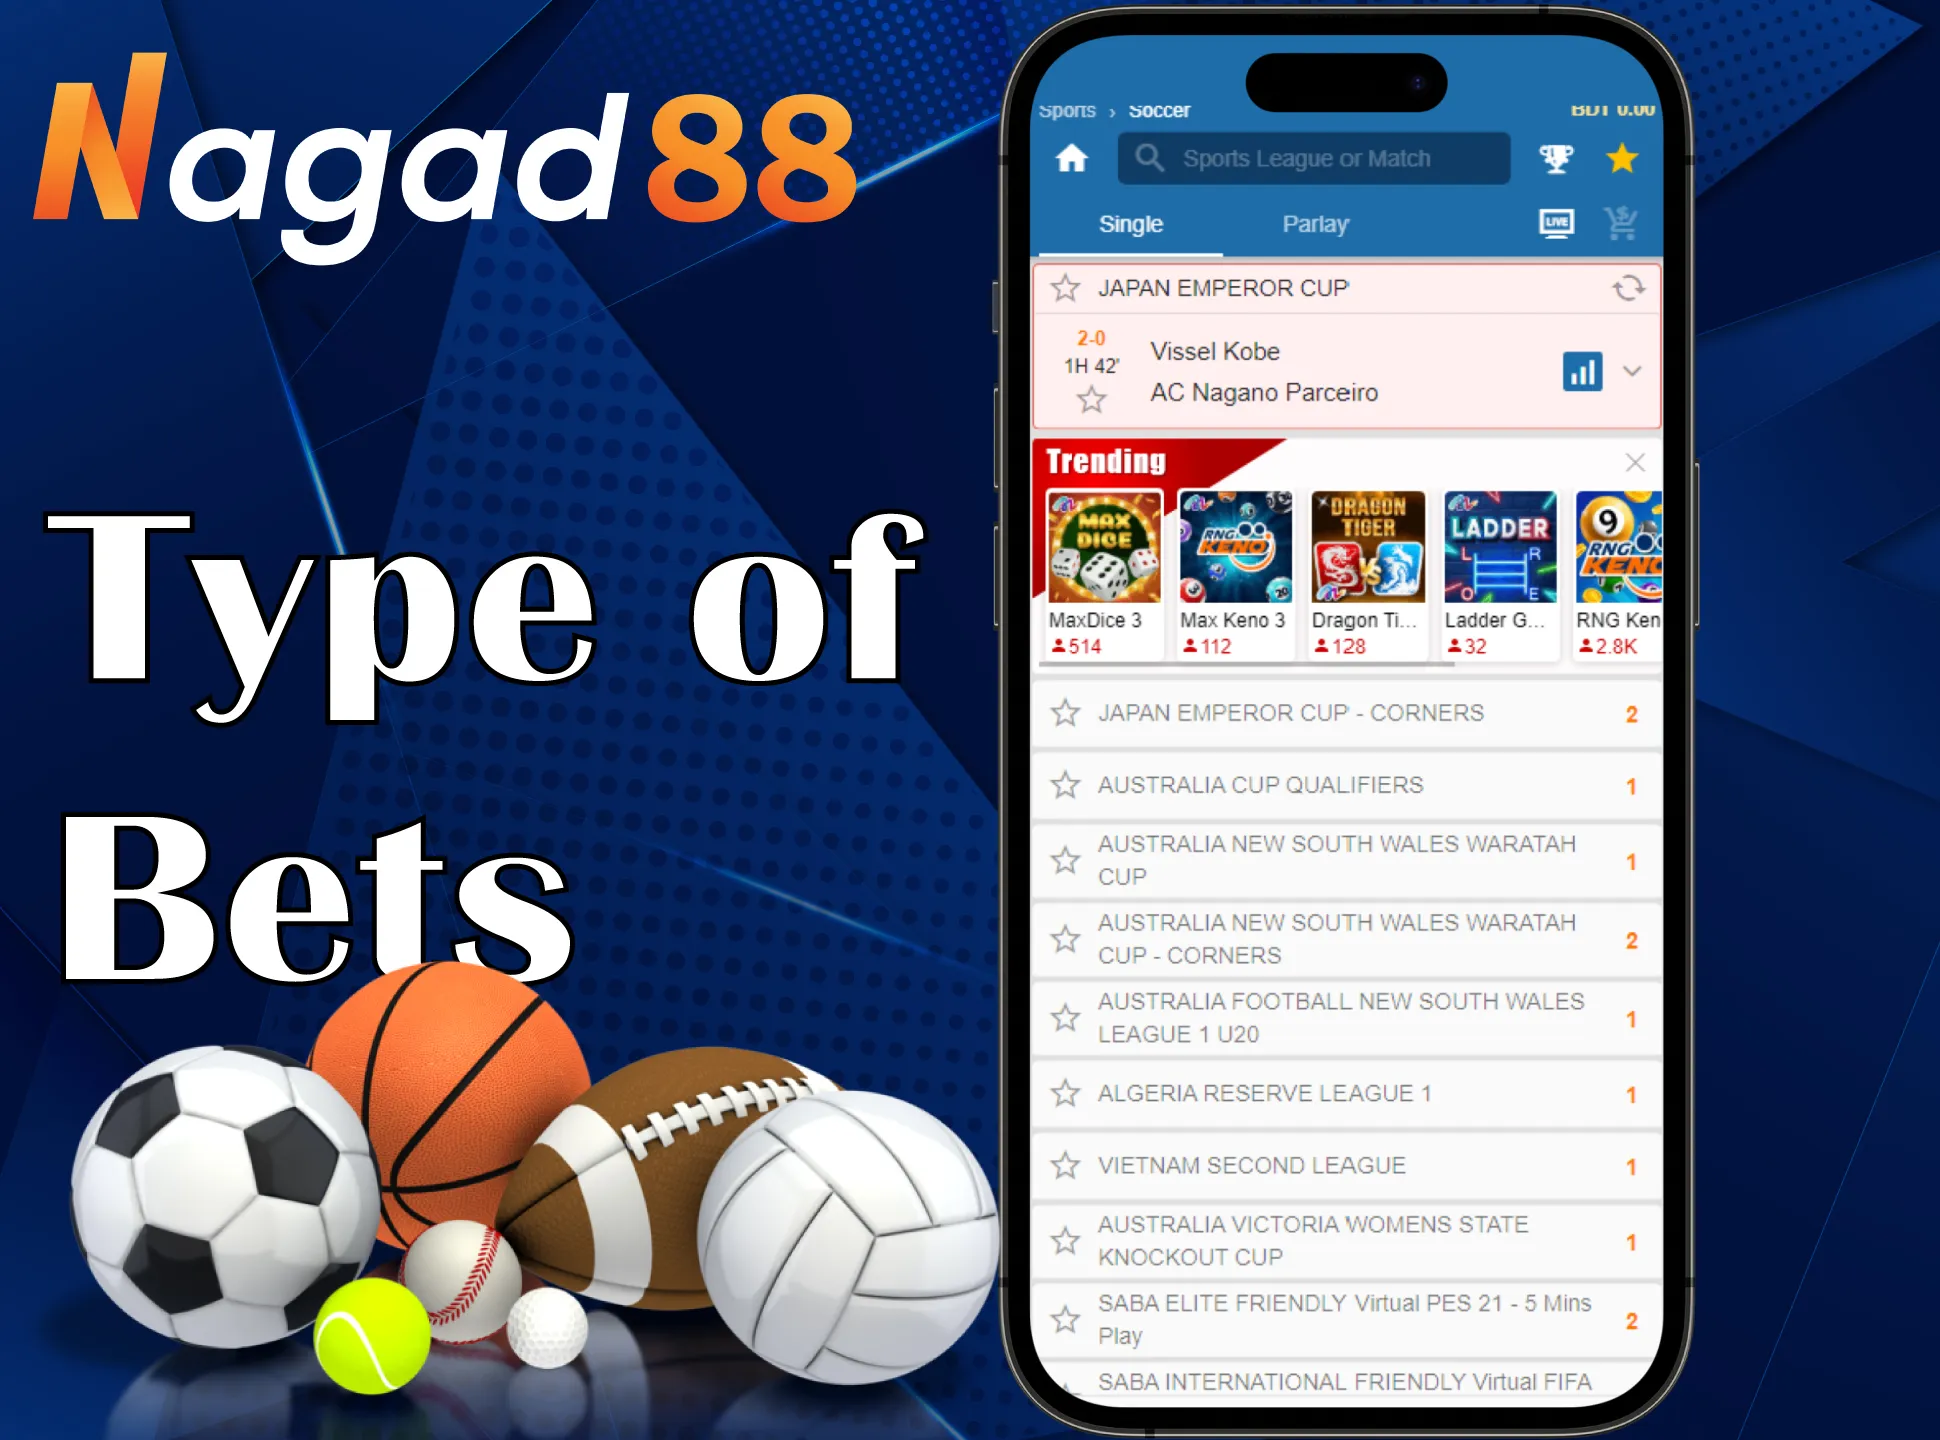 The Nagad88 app gives you the opportunity to try different types of bets.